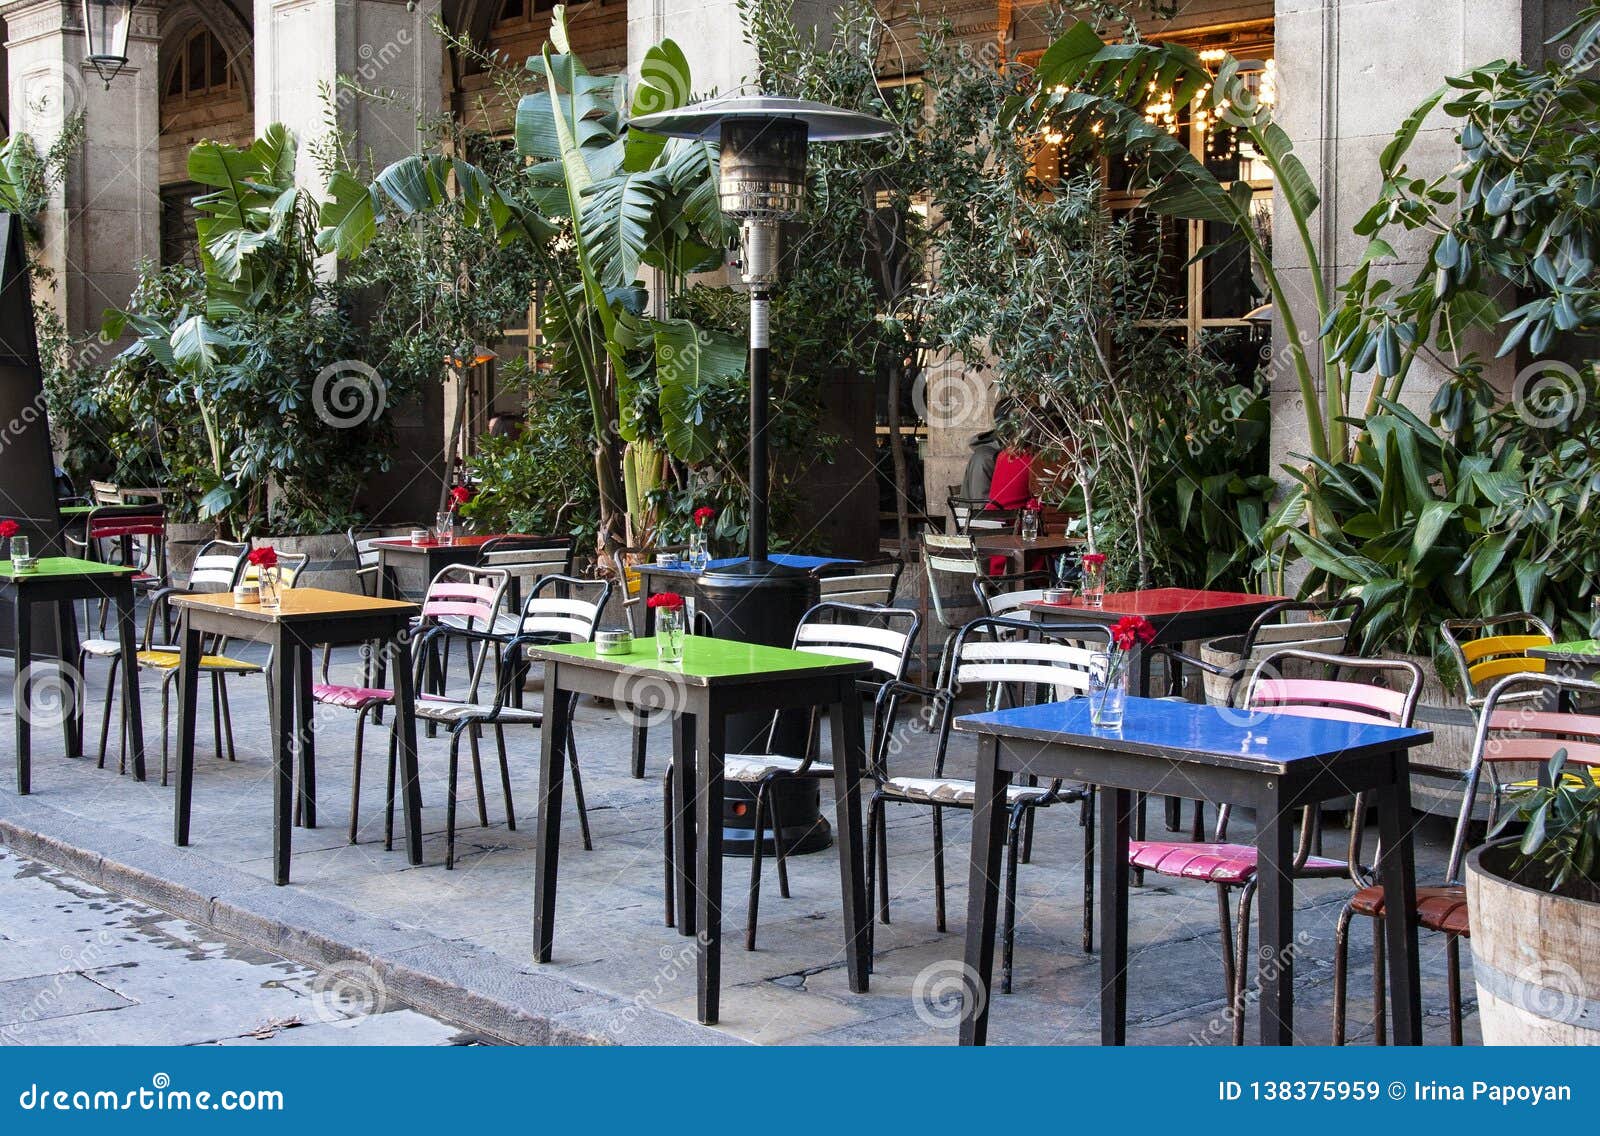 Street Cafe With Colorful Tables And Chairs In Barcelona Stock